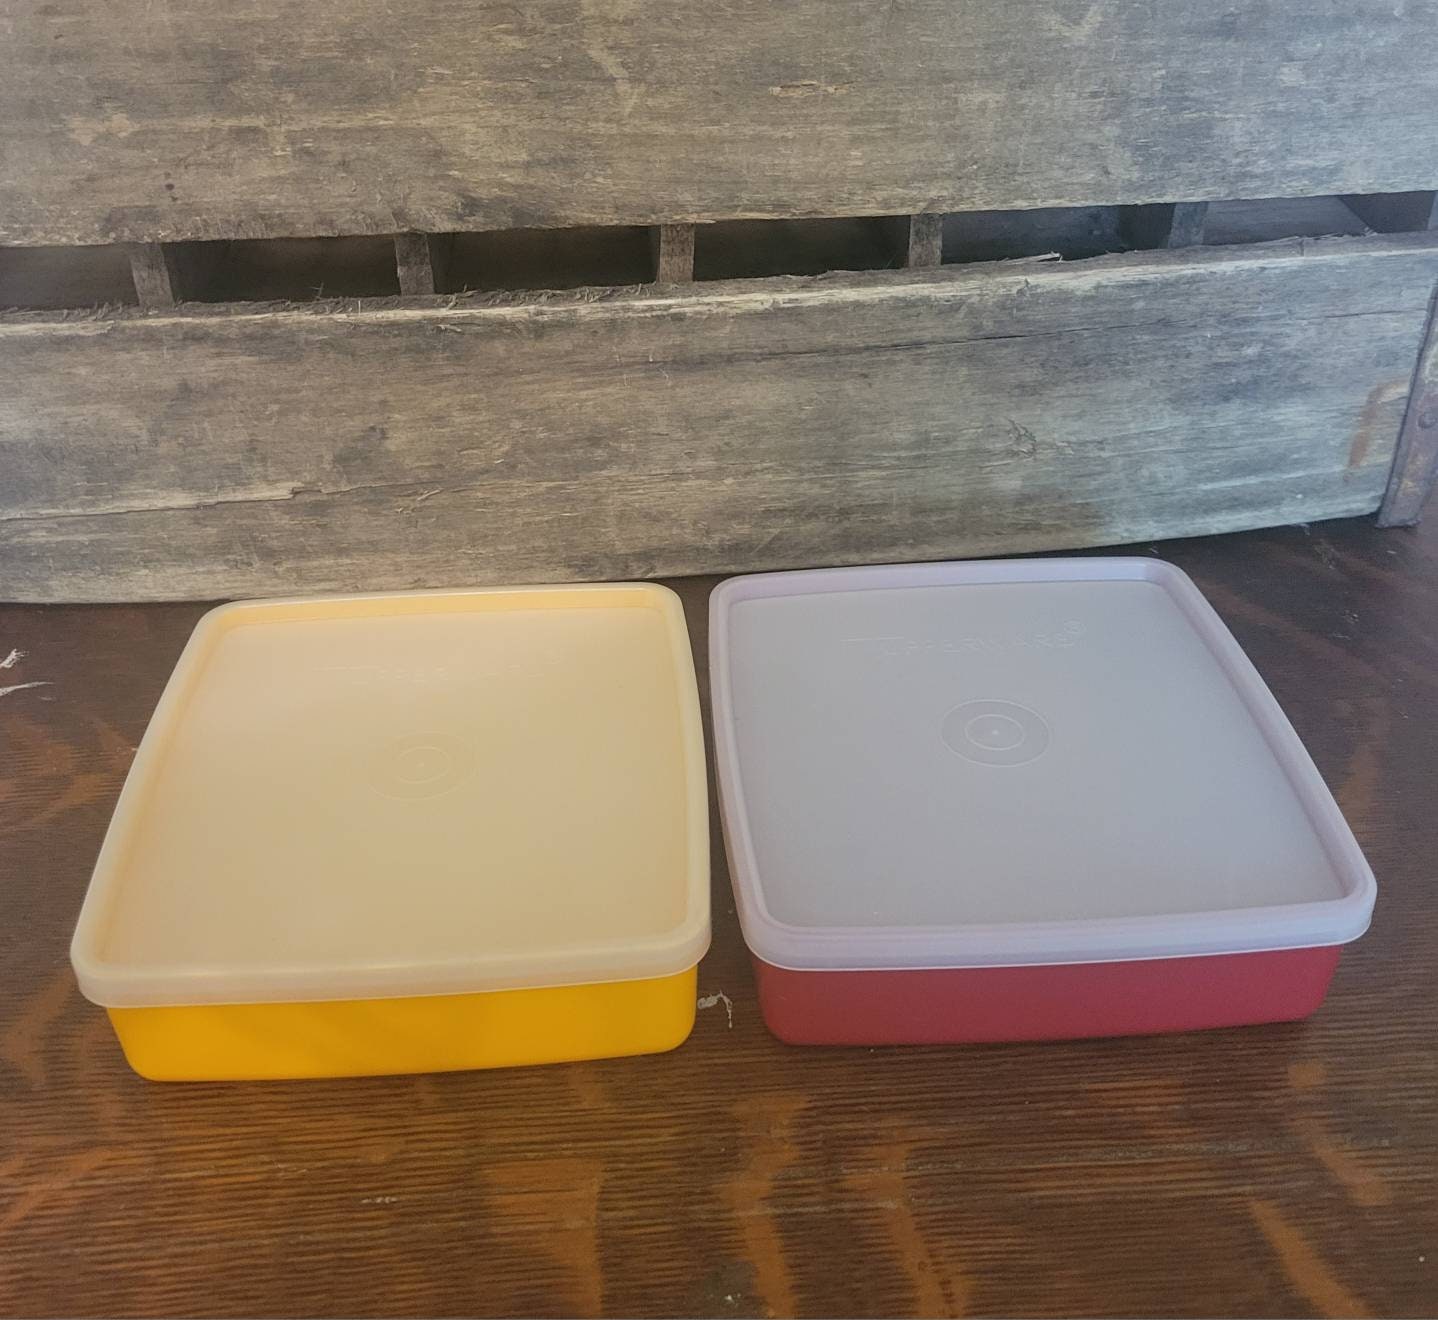 Vintage Tupperware Selection Condiment Caddy Vegetable Steamers